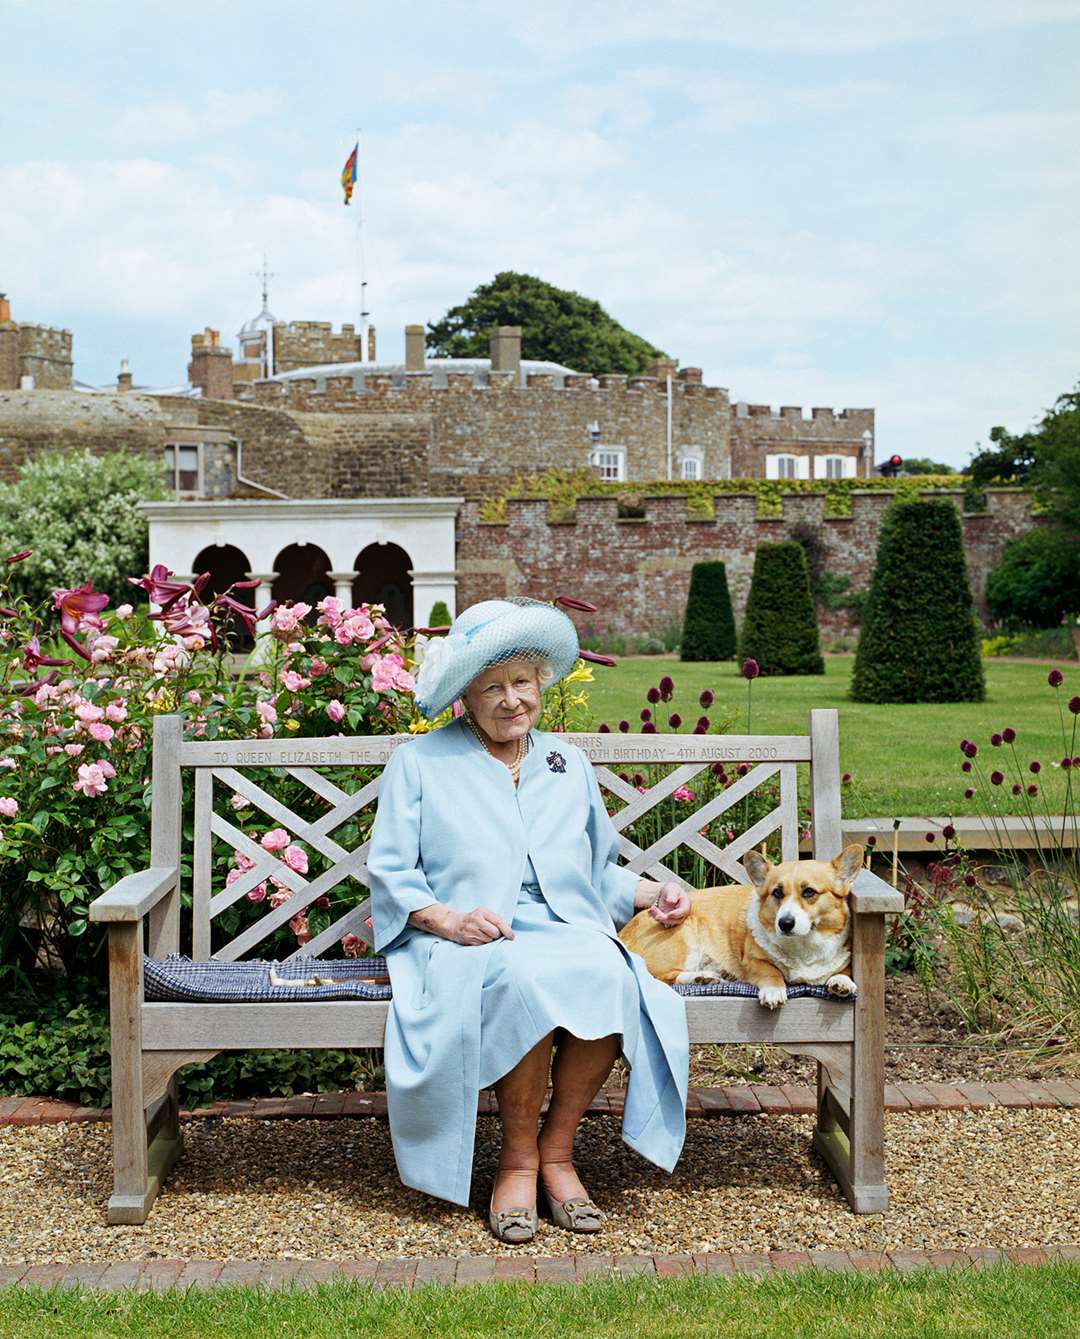 The Queen Mother was the longest serving Lord Warden